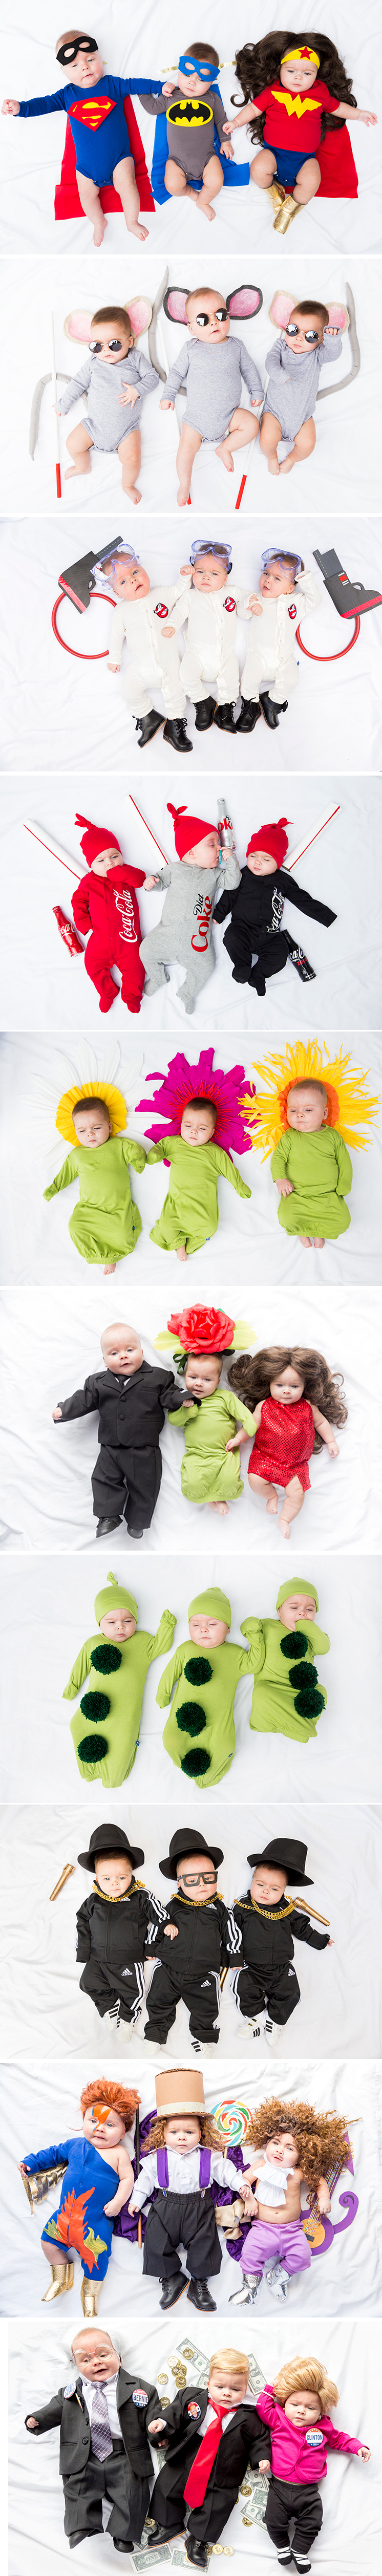 Triplets baby costumes for Halloween